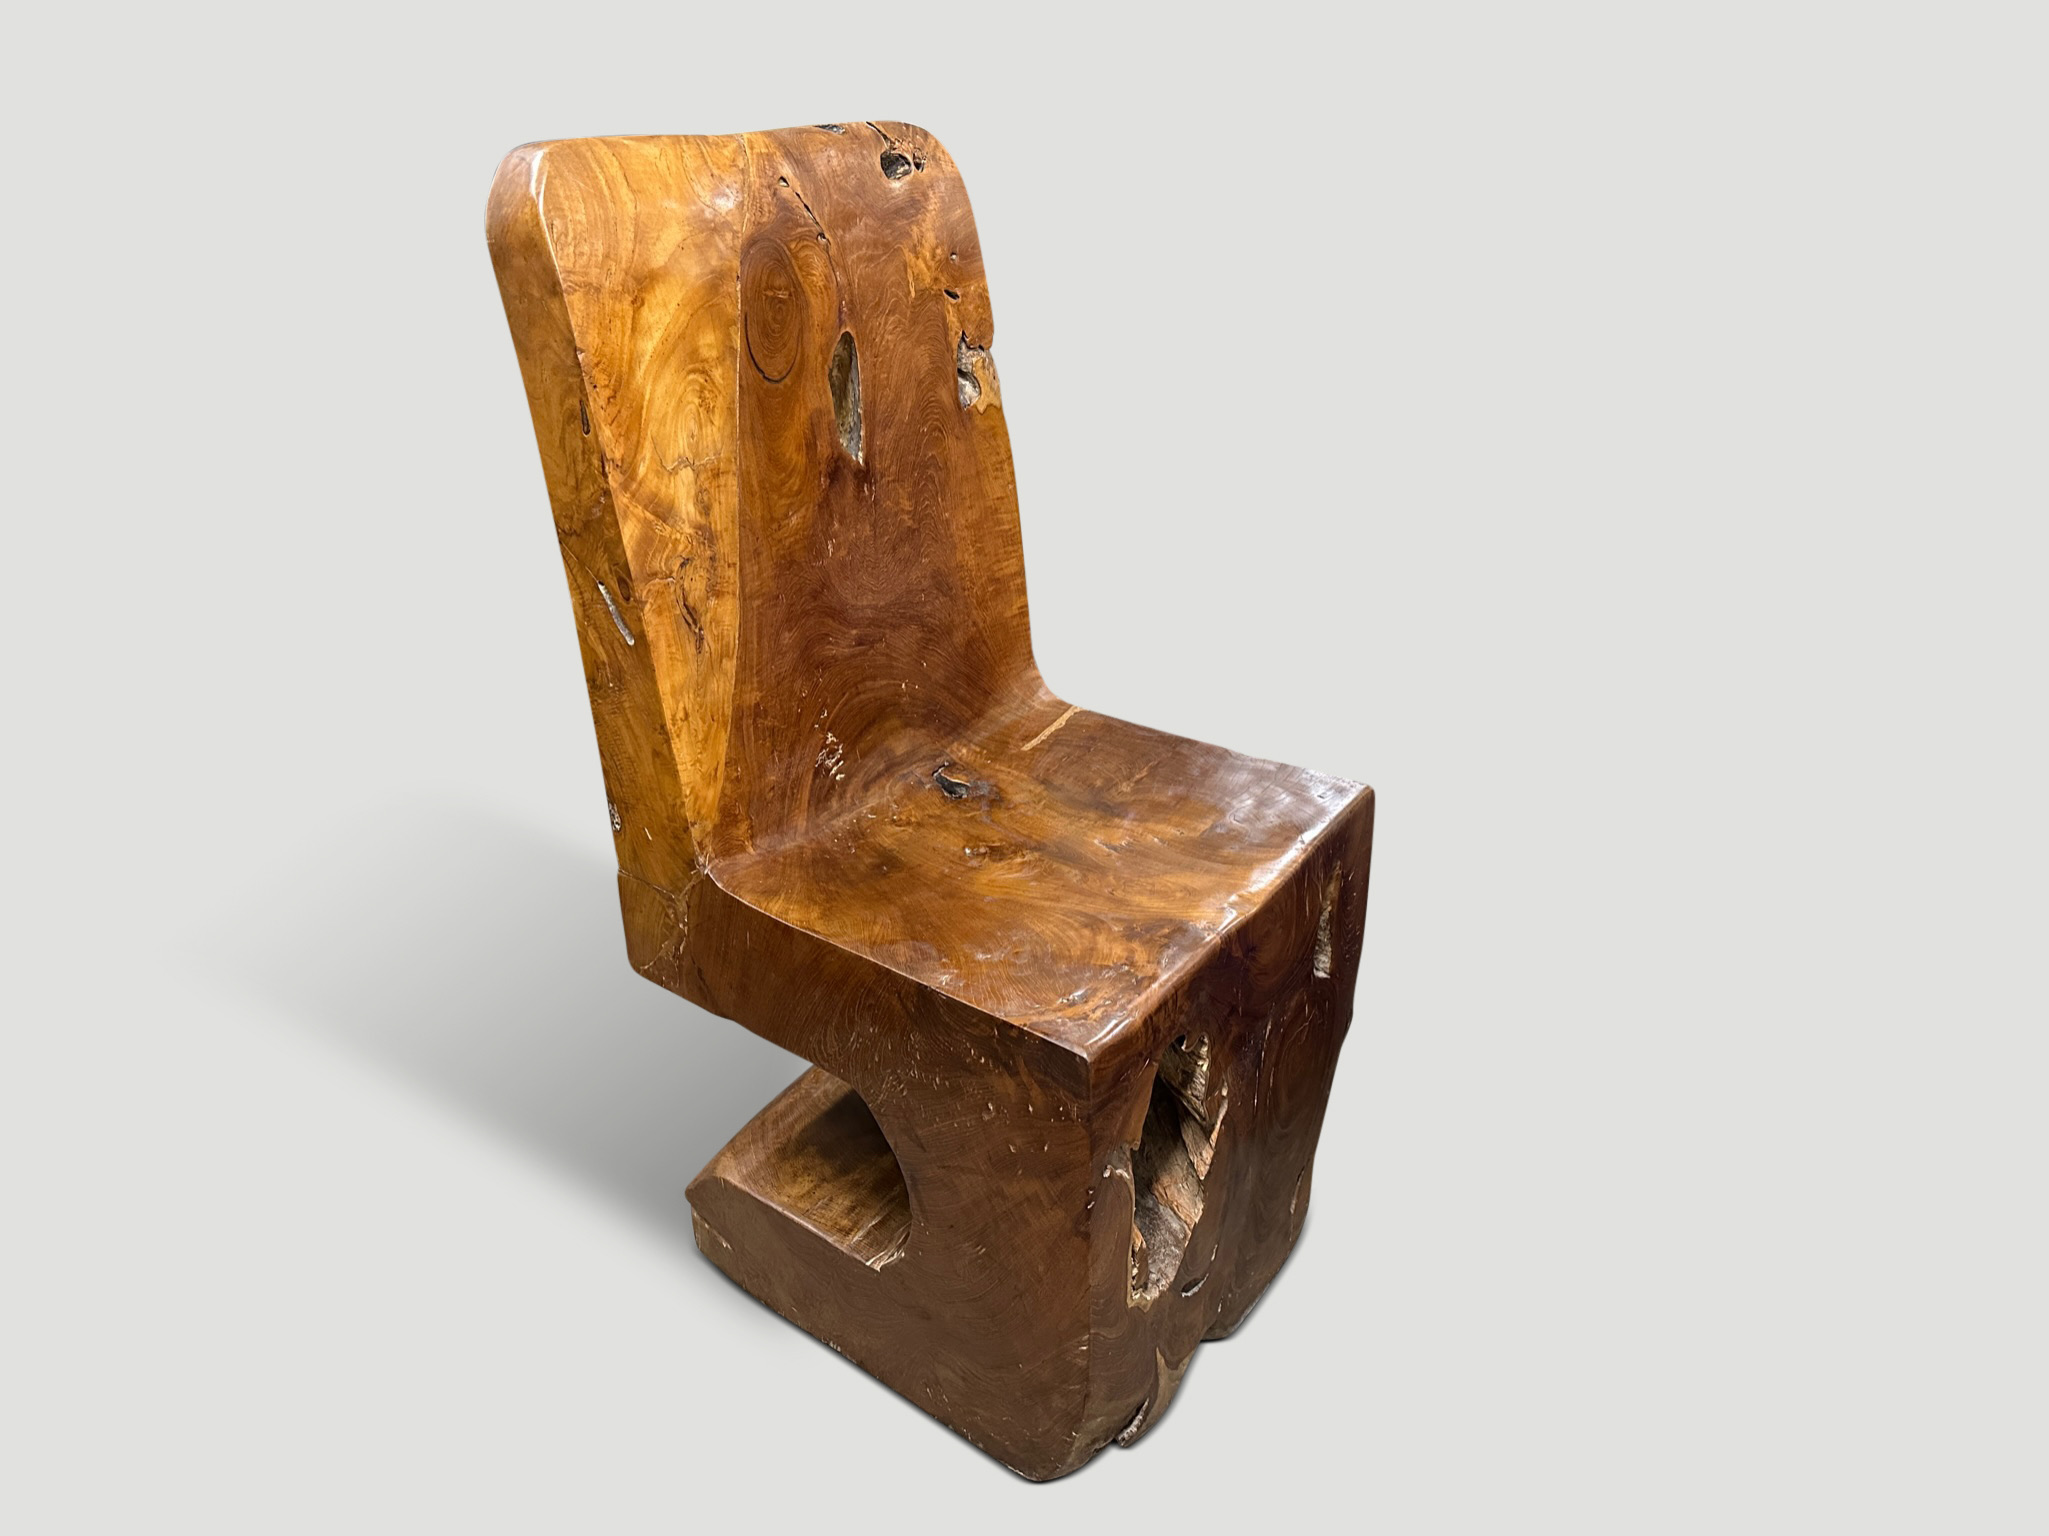 aged teak wood hand carved chair